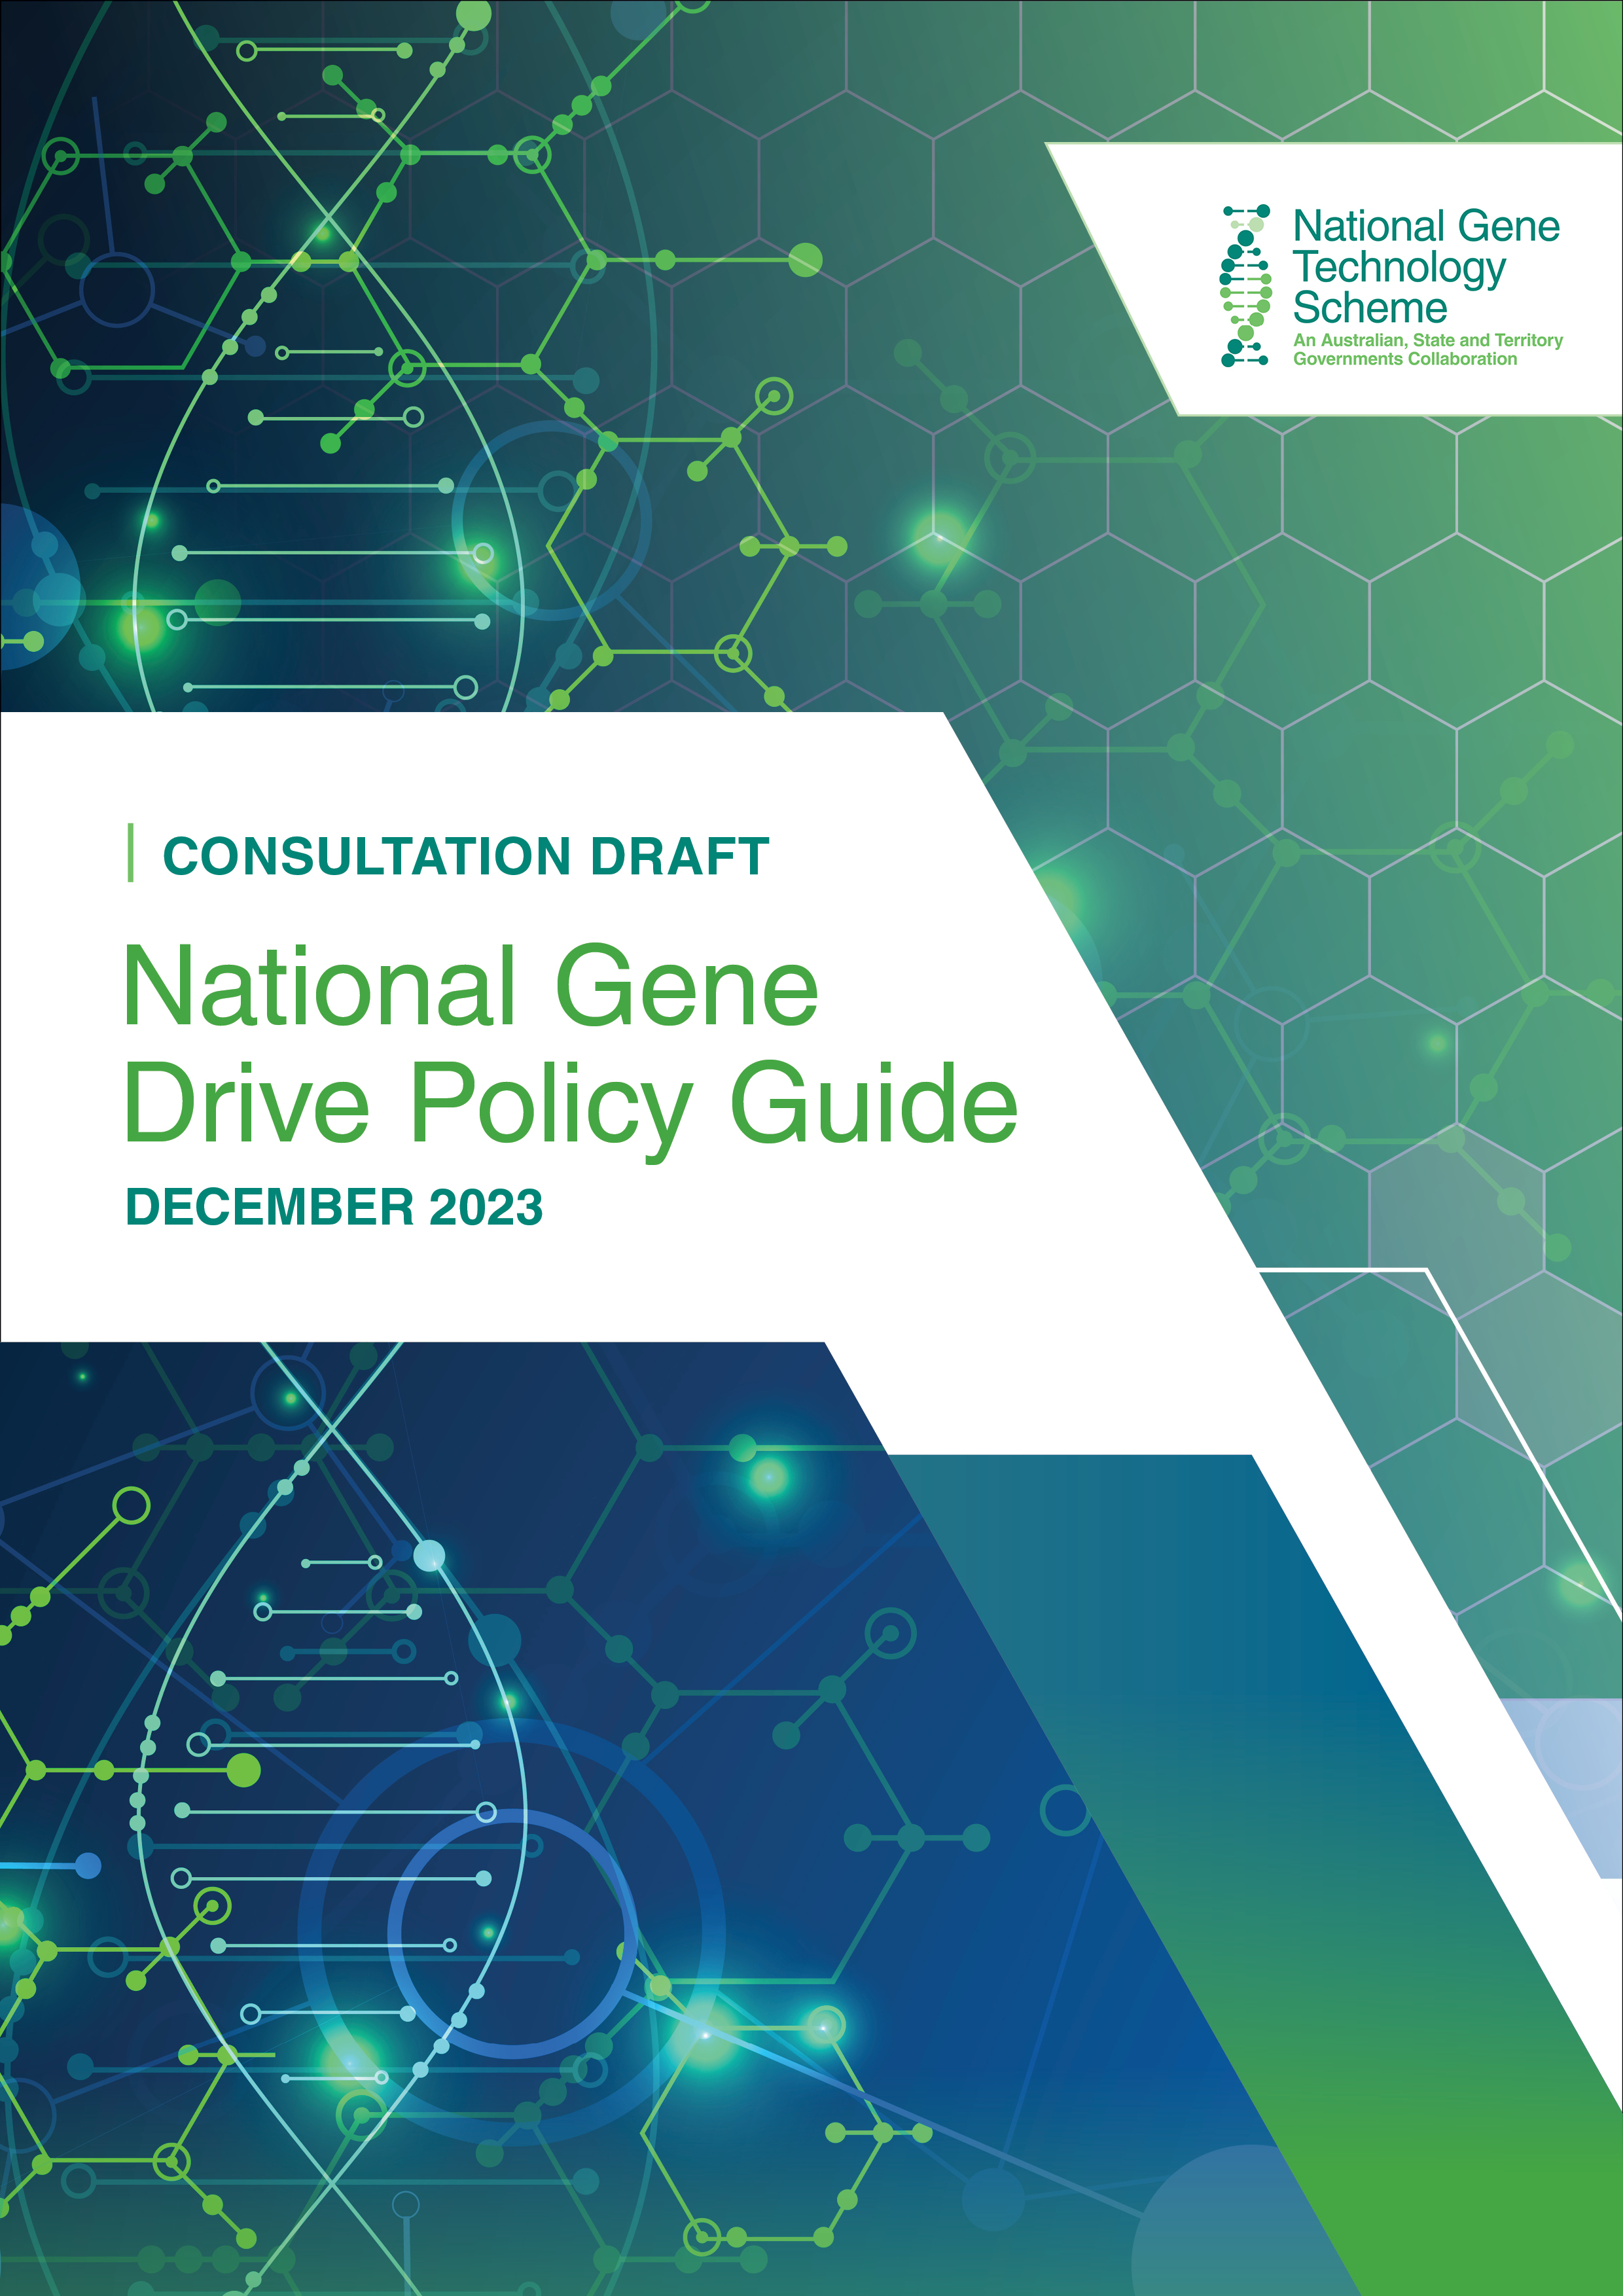 Cover image of the consultation draft national gene drives policy guide.